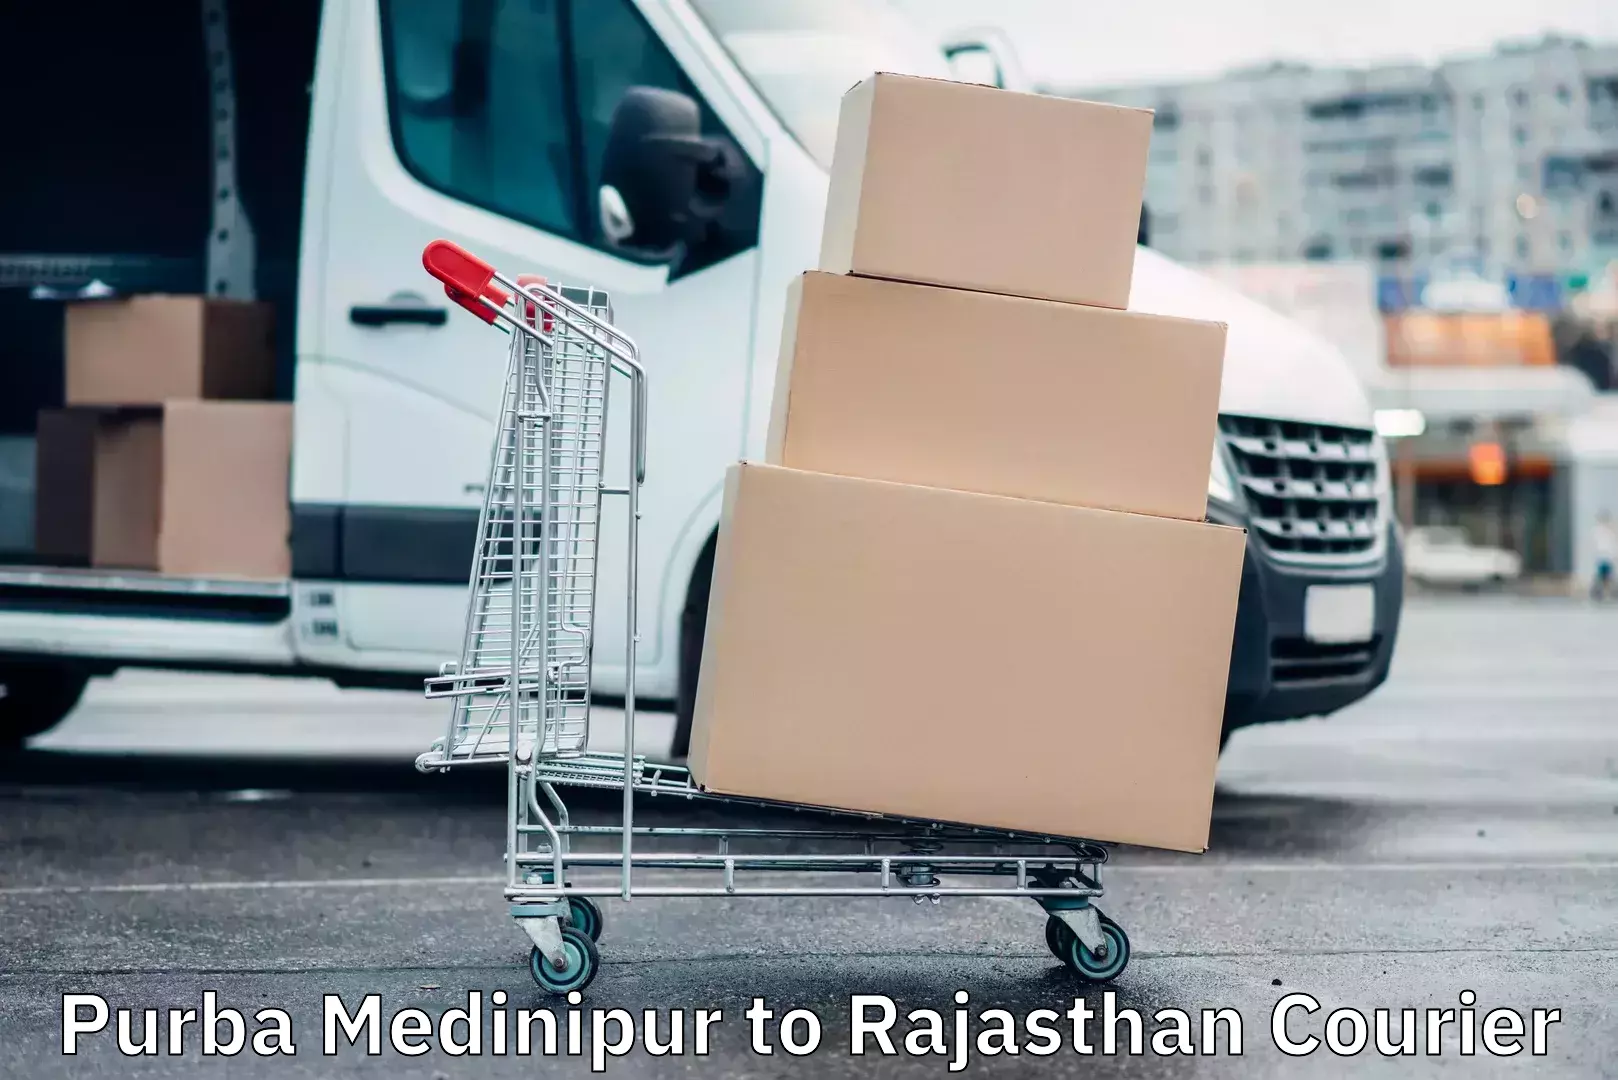 Nationwide courier service Purba Medinipur to Rajasthan